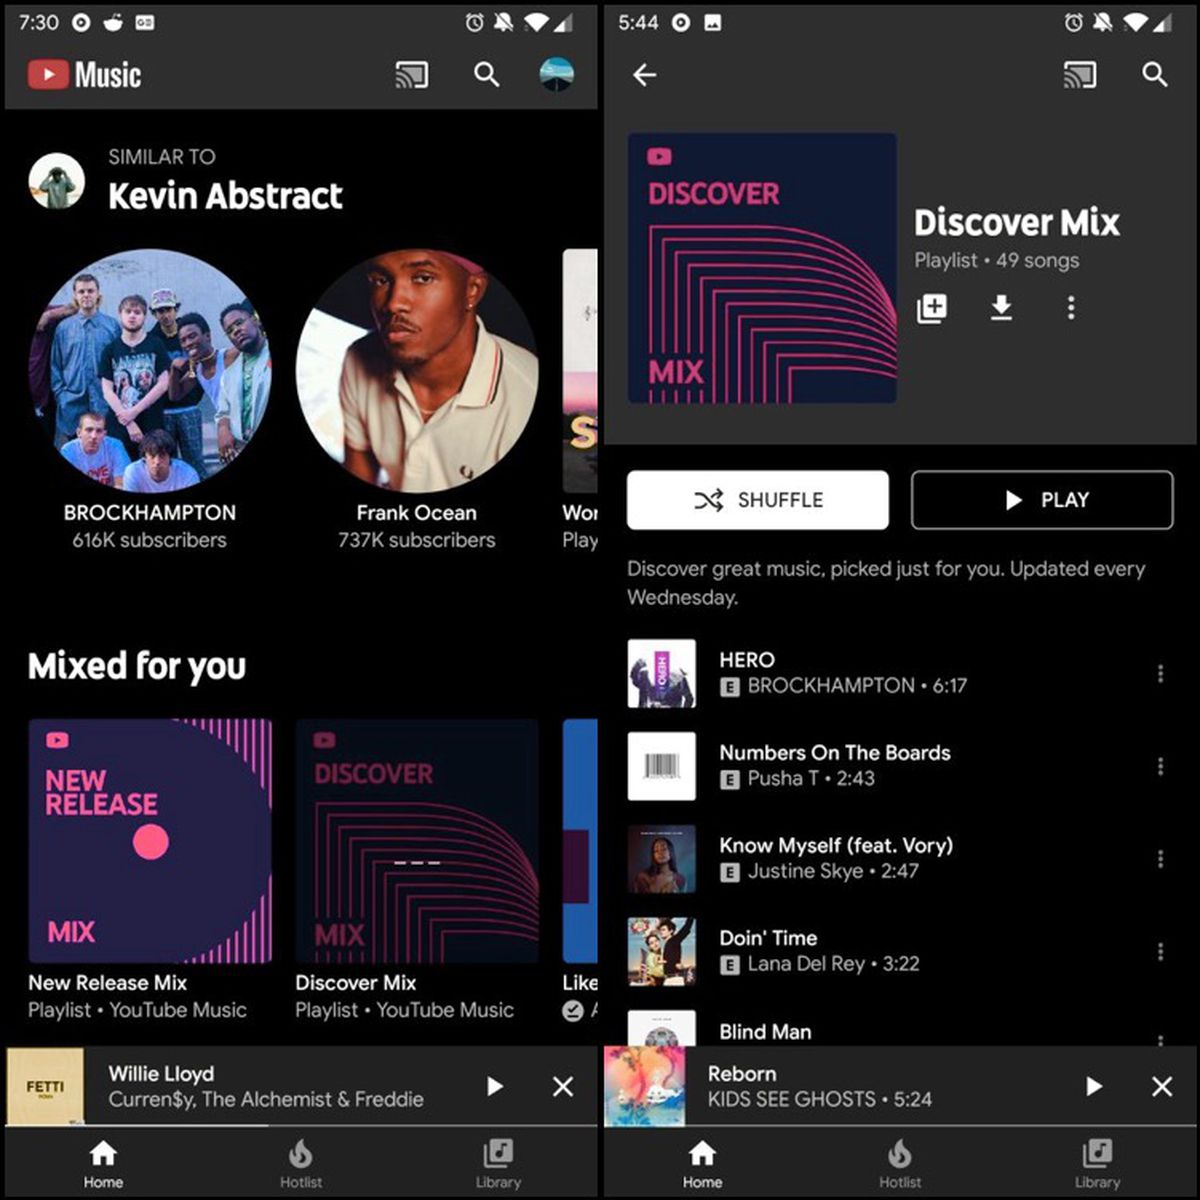 Music Gains New Personalized 'Discover Mix' Playlist Weekly - MacRumors